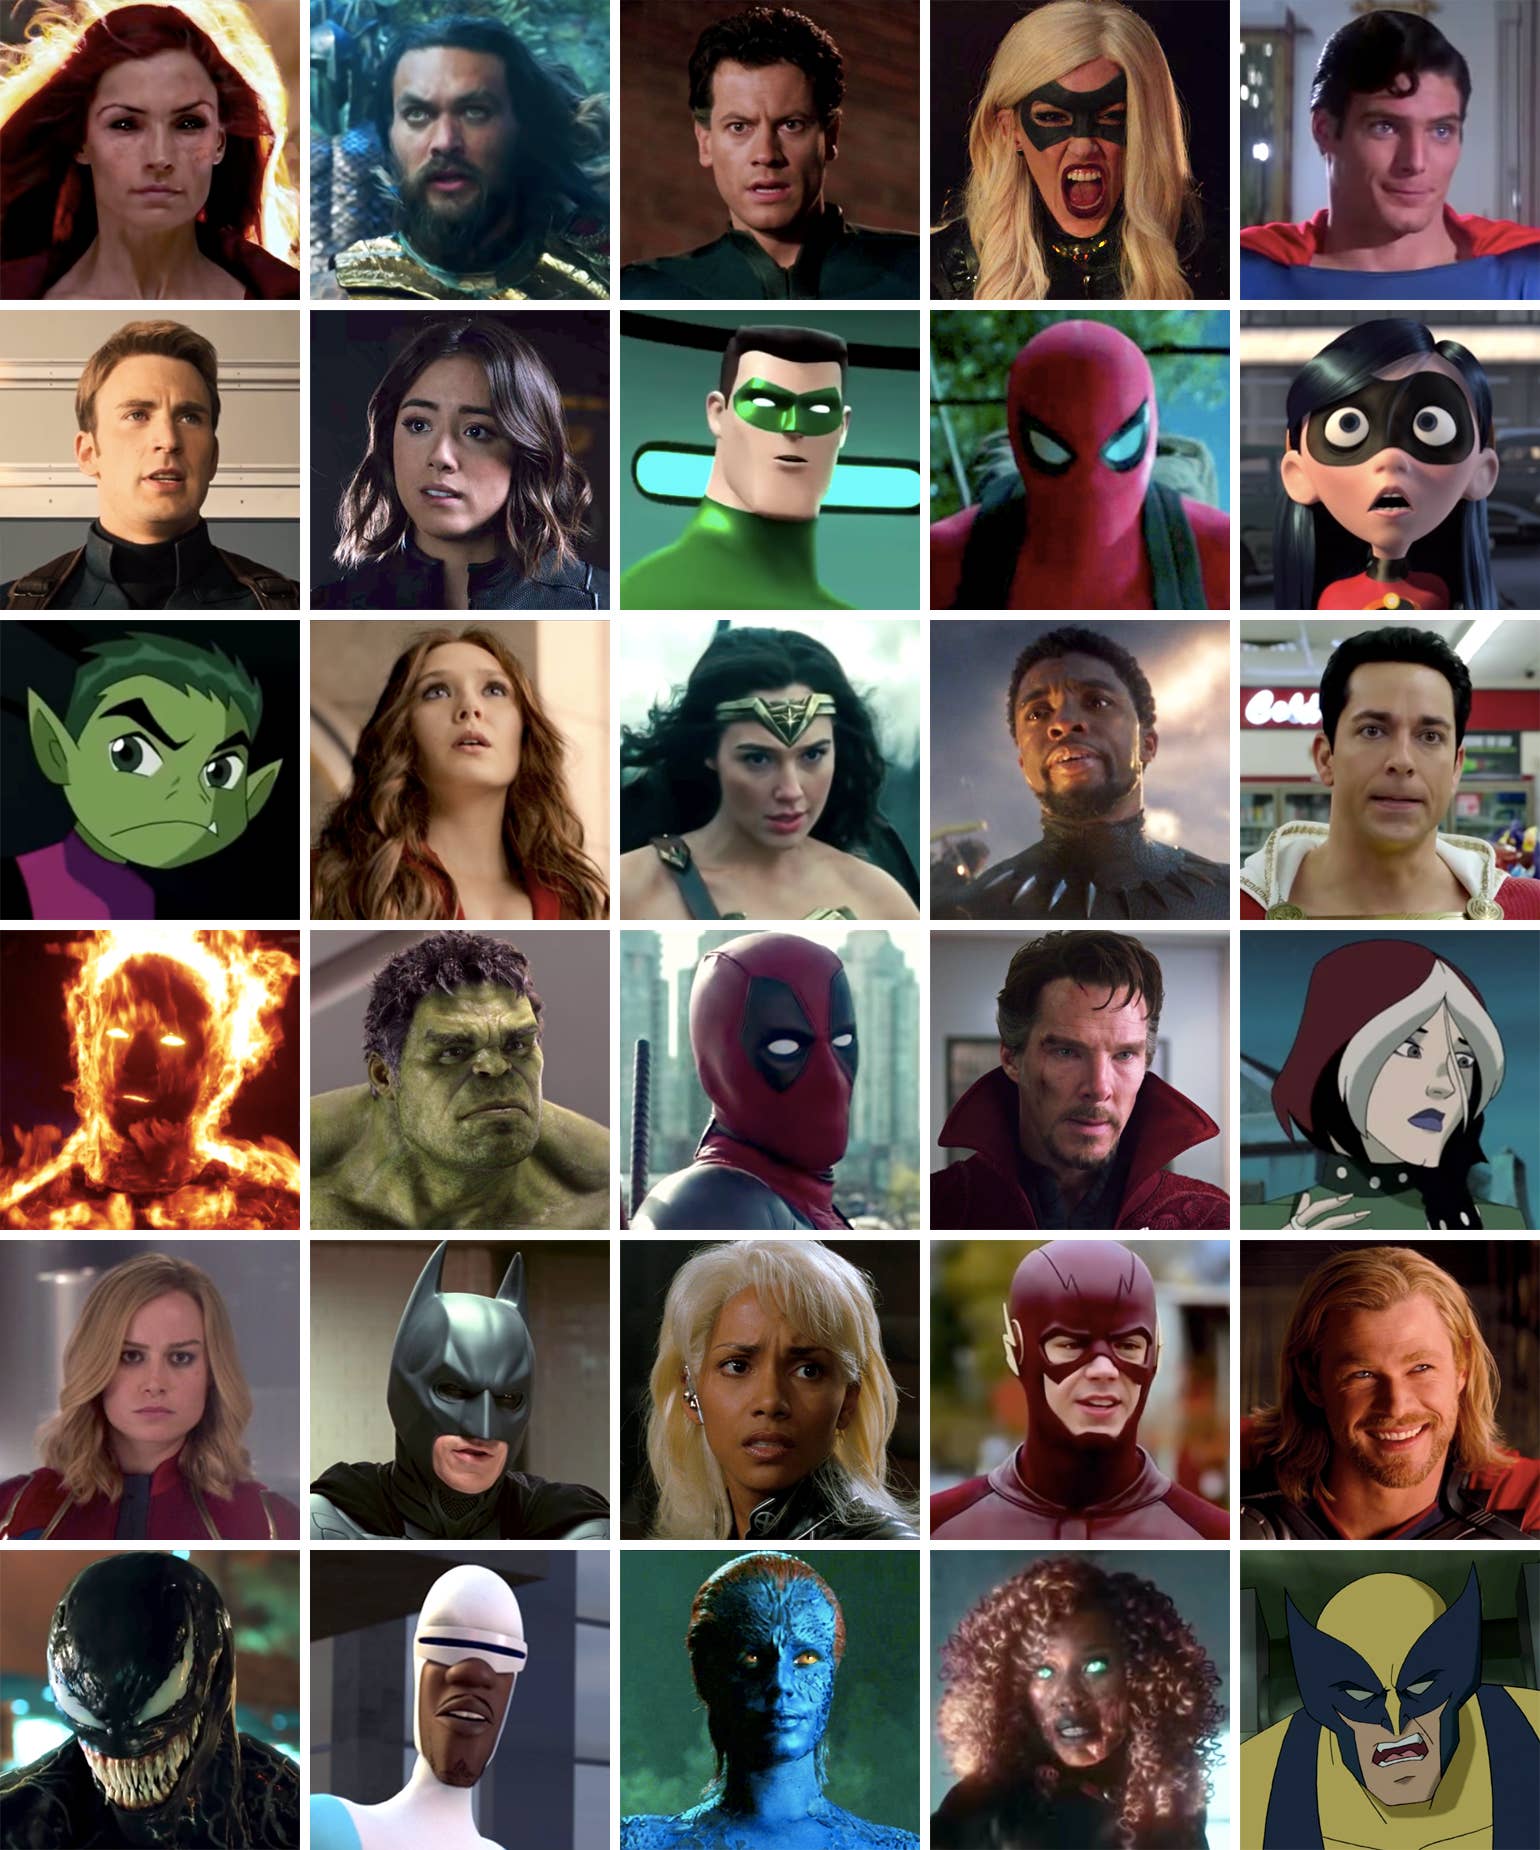 Can You Identify These Superheroes?